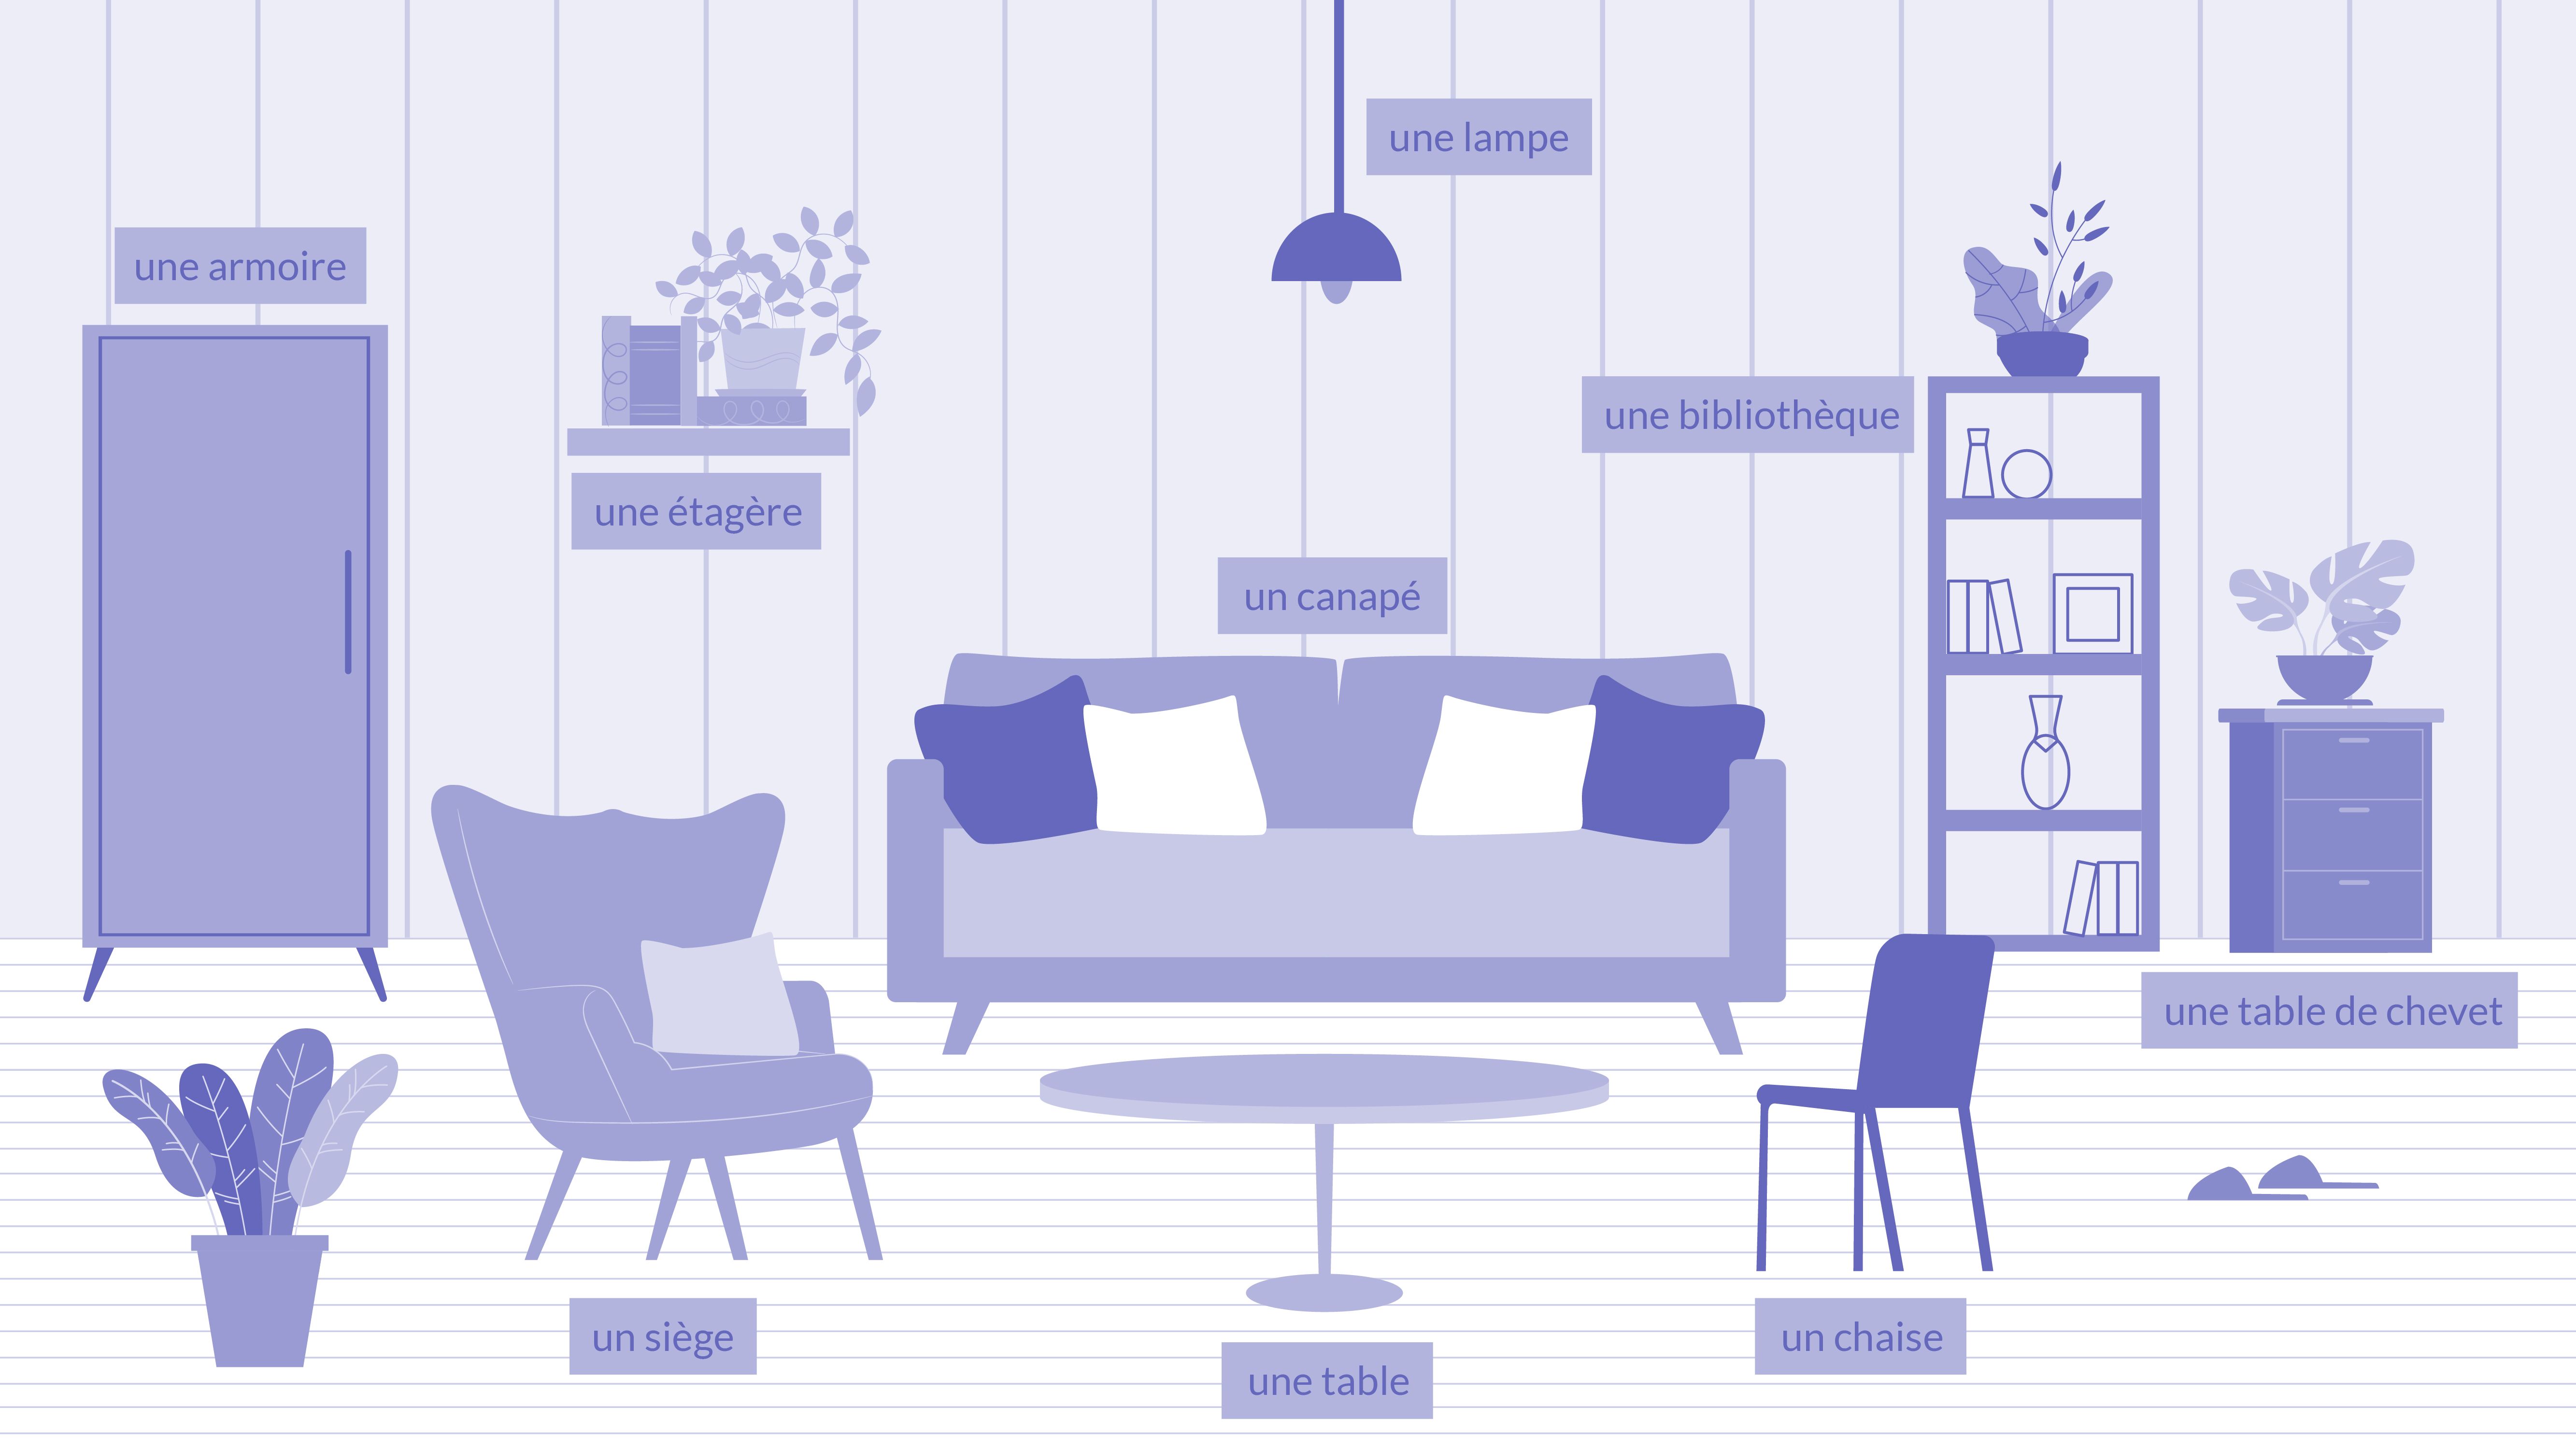 There is an empty room in the illustration, filled with several furniture pieces, they’re all have their respective French names on them: une lampe (lamp), une étagère (bookshelf), un canapé (sofa), un chaise (chair), etc.